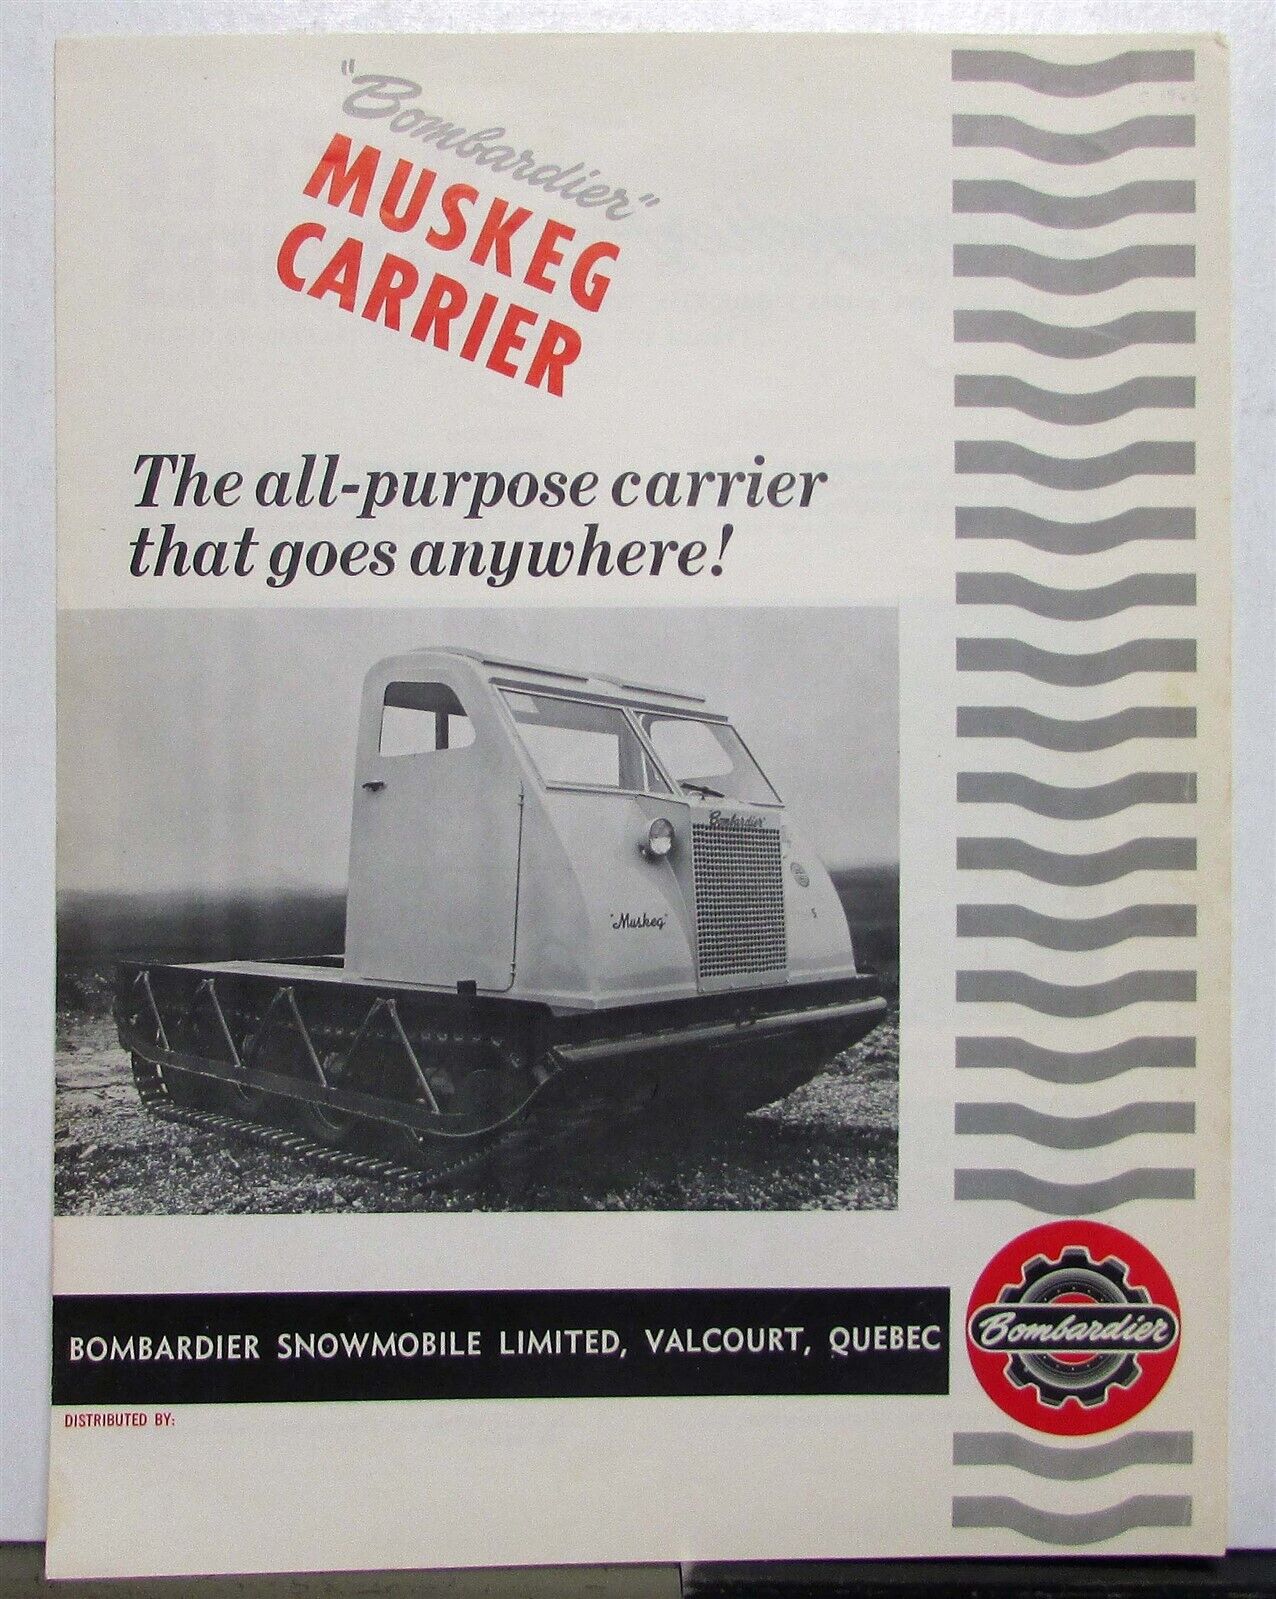 1960s Bombardier Muskeg Carrier Snowmobile Specifications Sales Folder CANADIAN